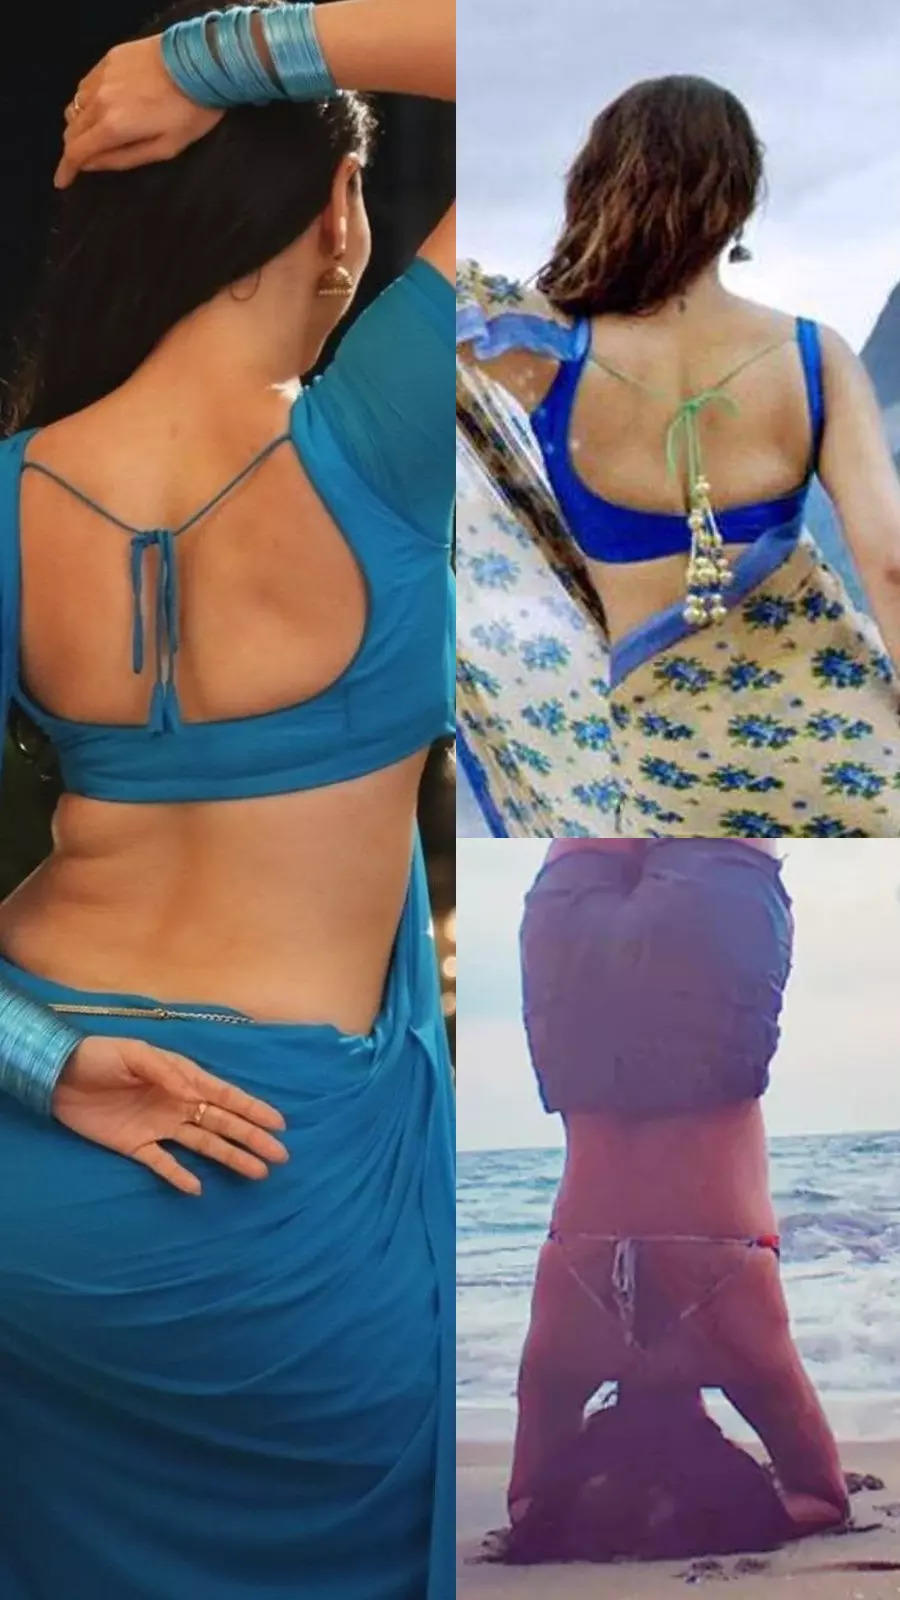 Kollywood actresses and their alluring back pose show